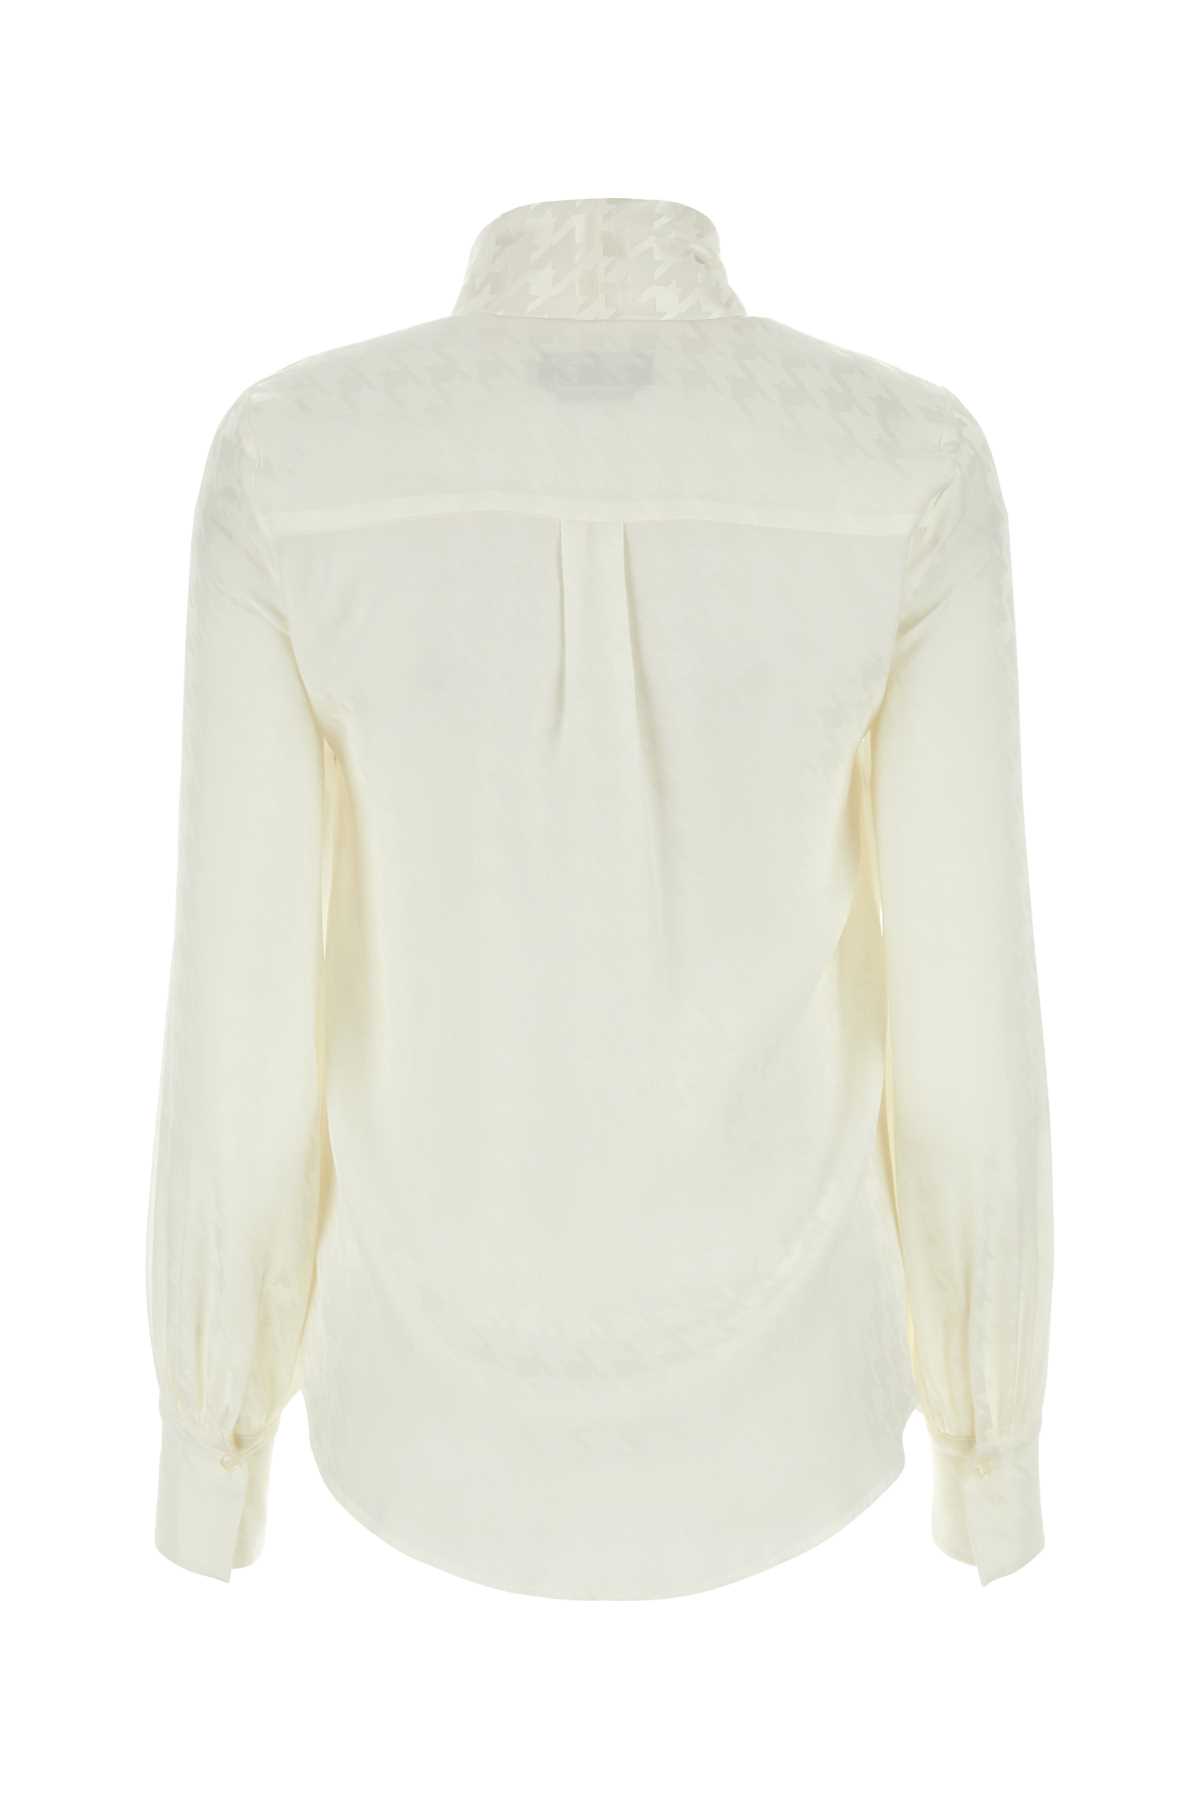 Msgm Ivory Satin Shirt In Offwhite02